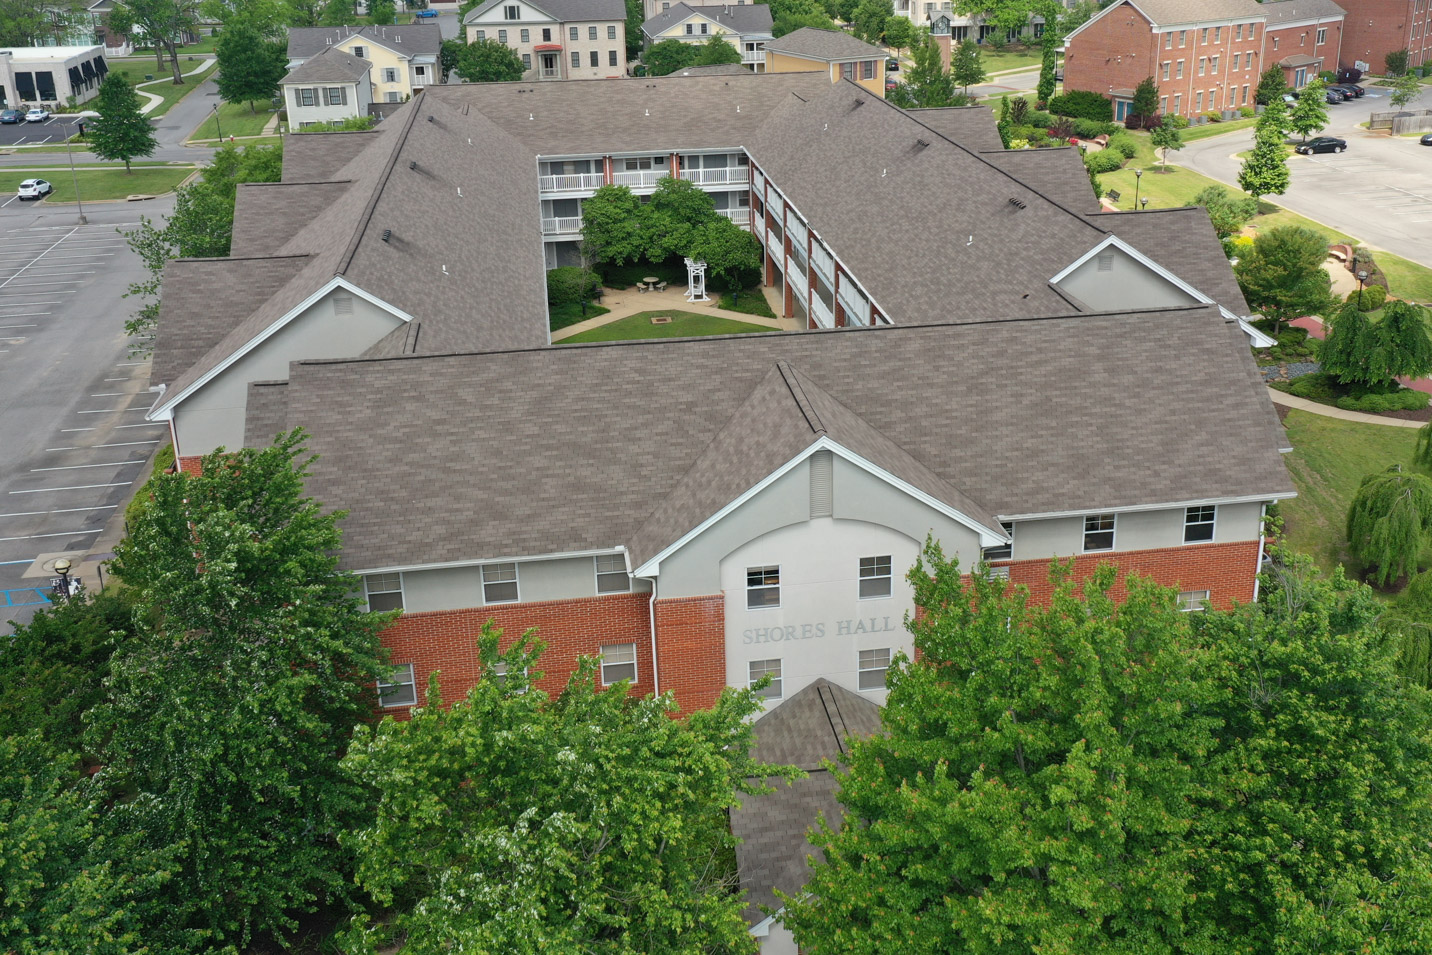 This is a photo of Shores Hall, a women's dorm at Harding University.